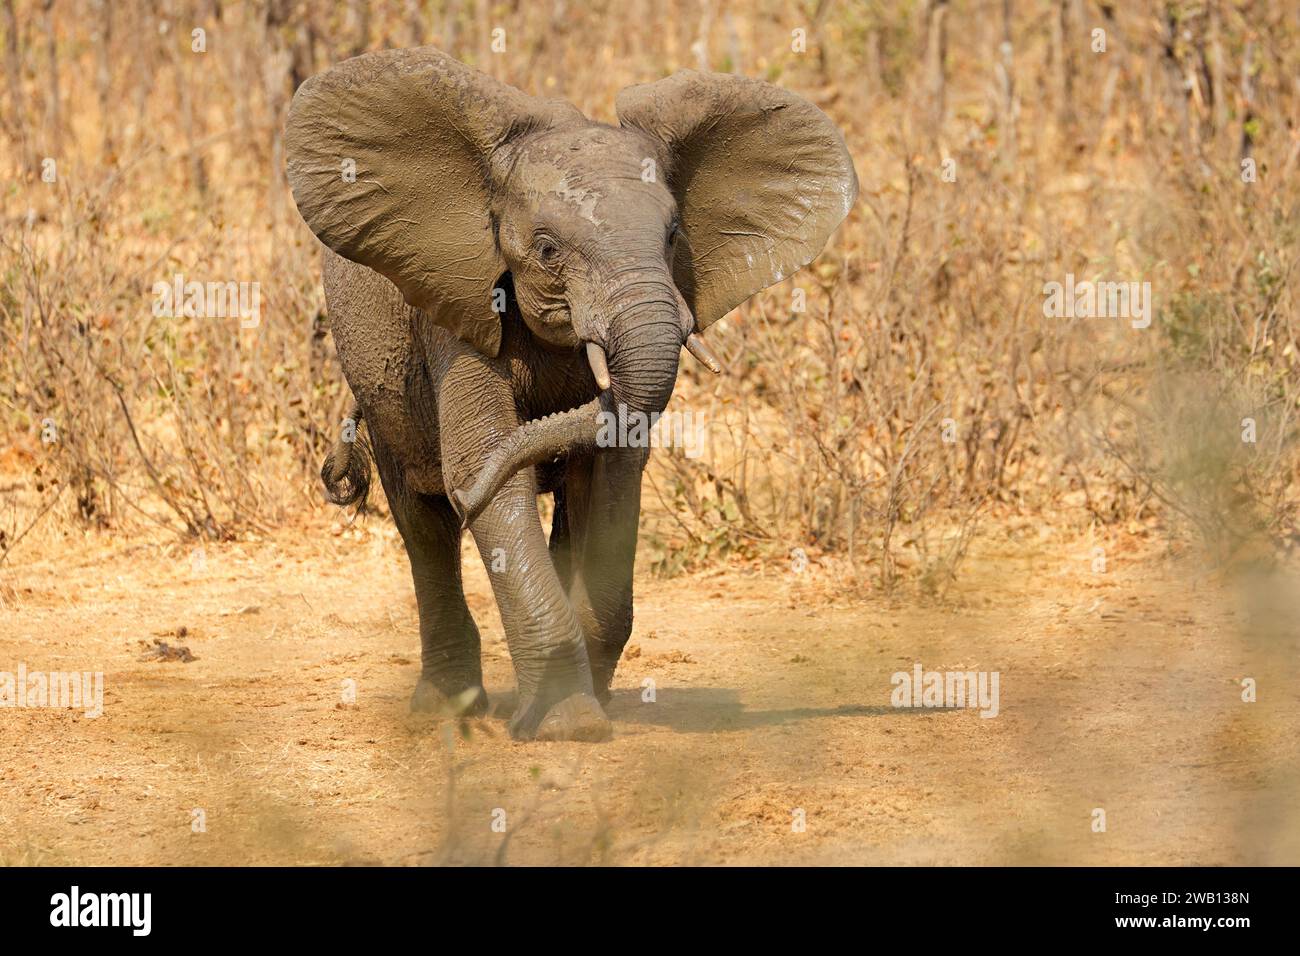 An aggressive African elephant (Loxodonta africana), Kruger National Park, South Africa Stock Photo